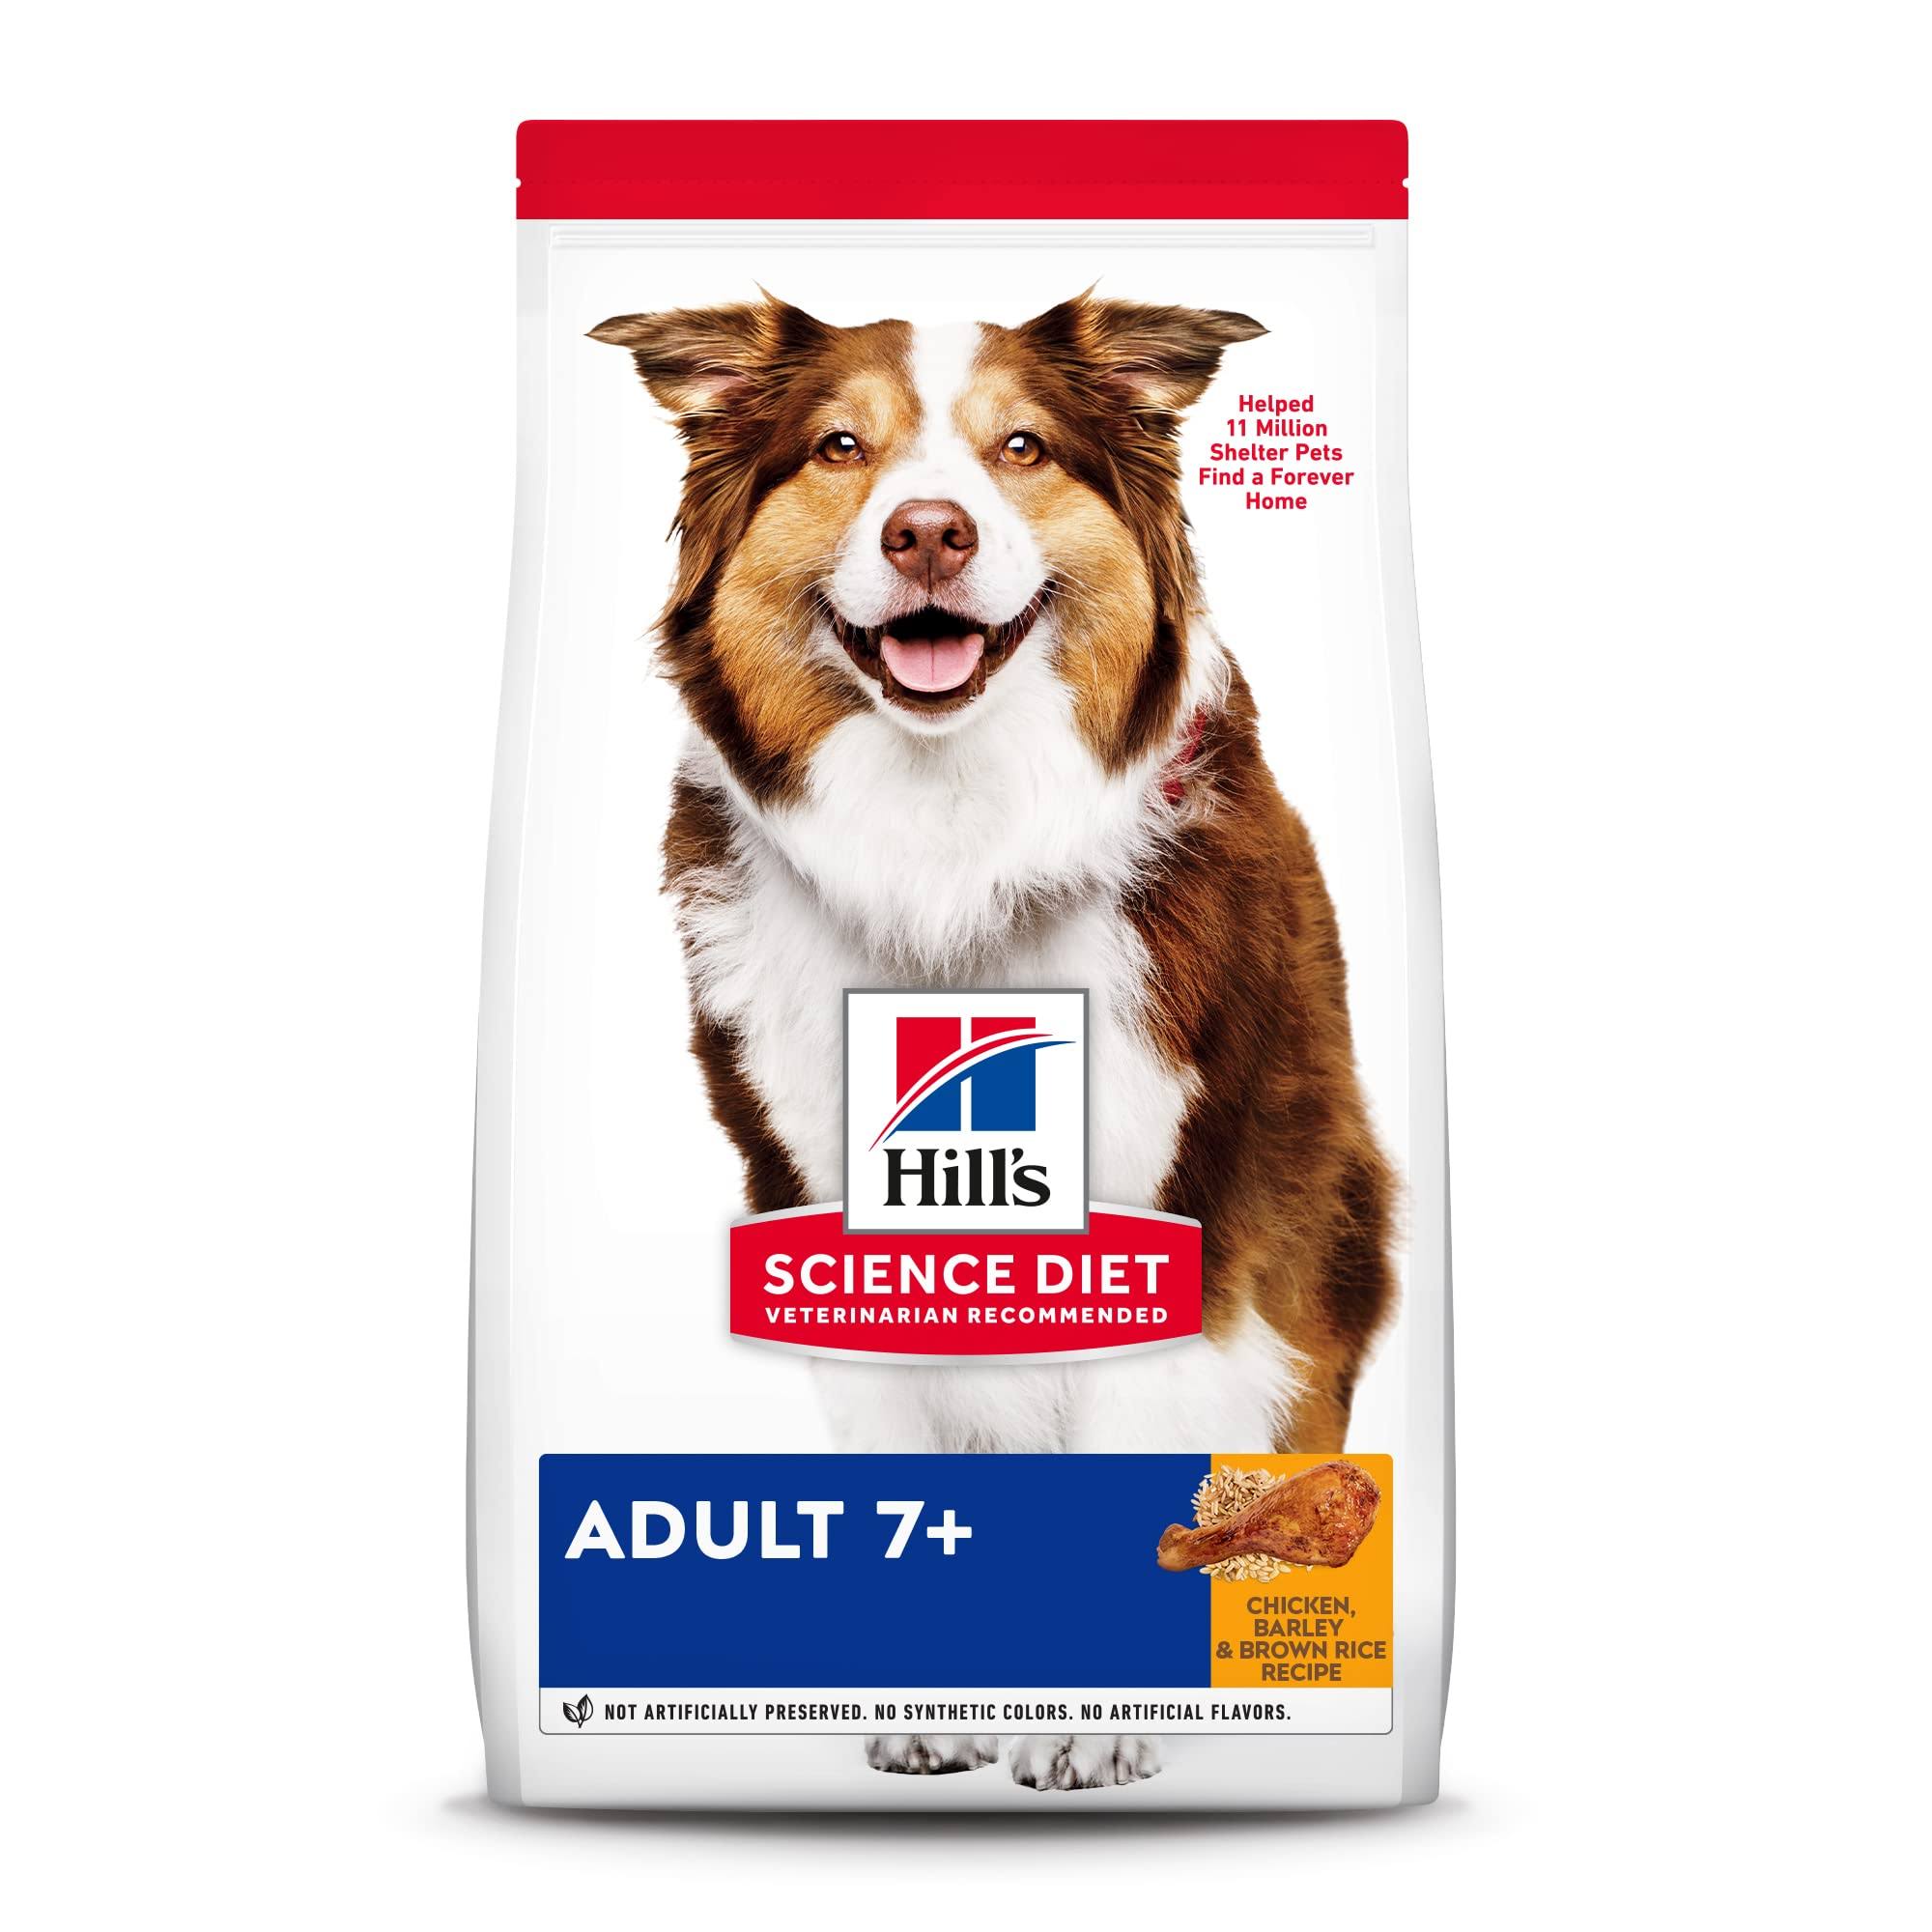 Hill's Science Diet Dry Dog Food, Adult 7+ For Senior Dogs, Chicken Meal, Barley & Brown Rice Recipe, 15 LB Bag